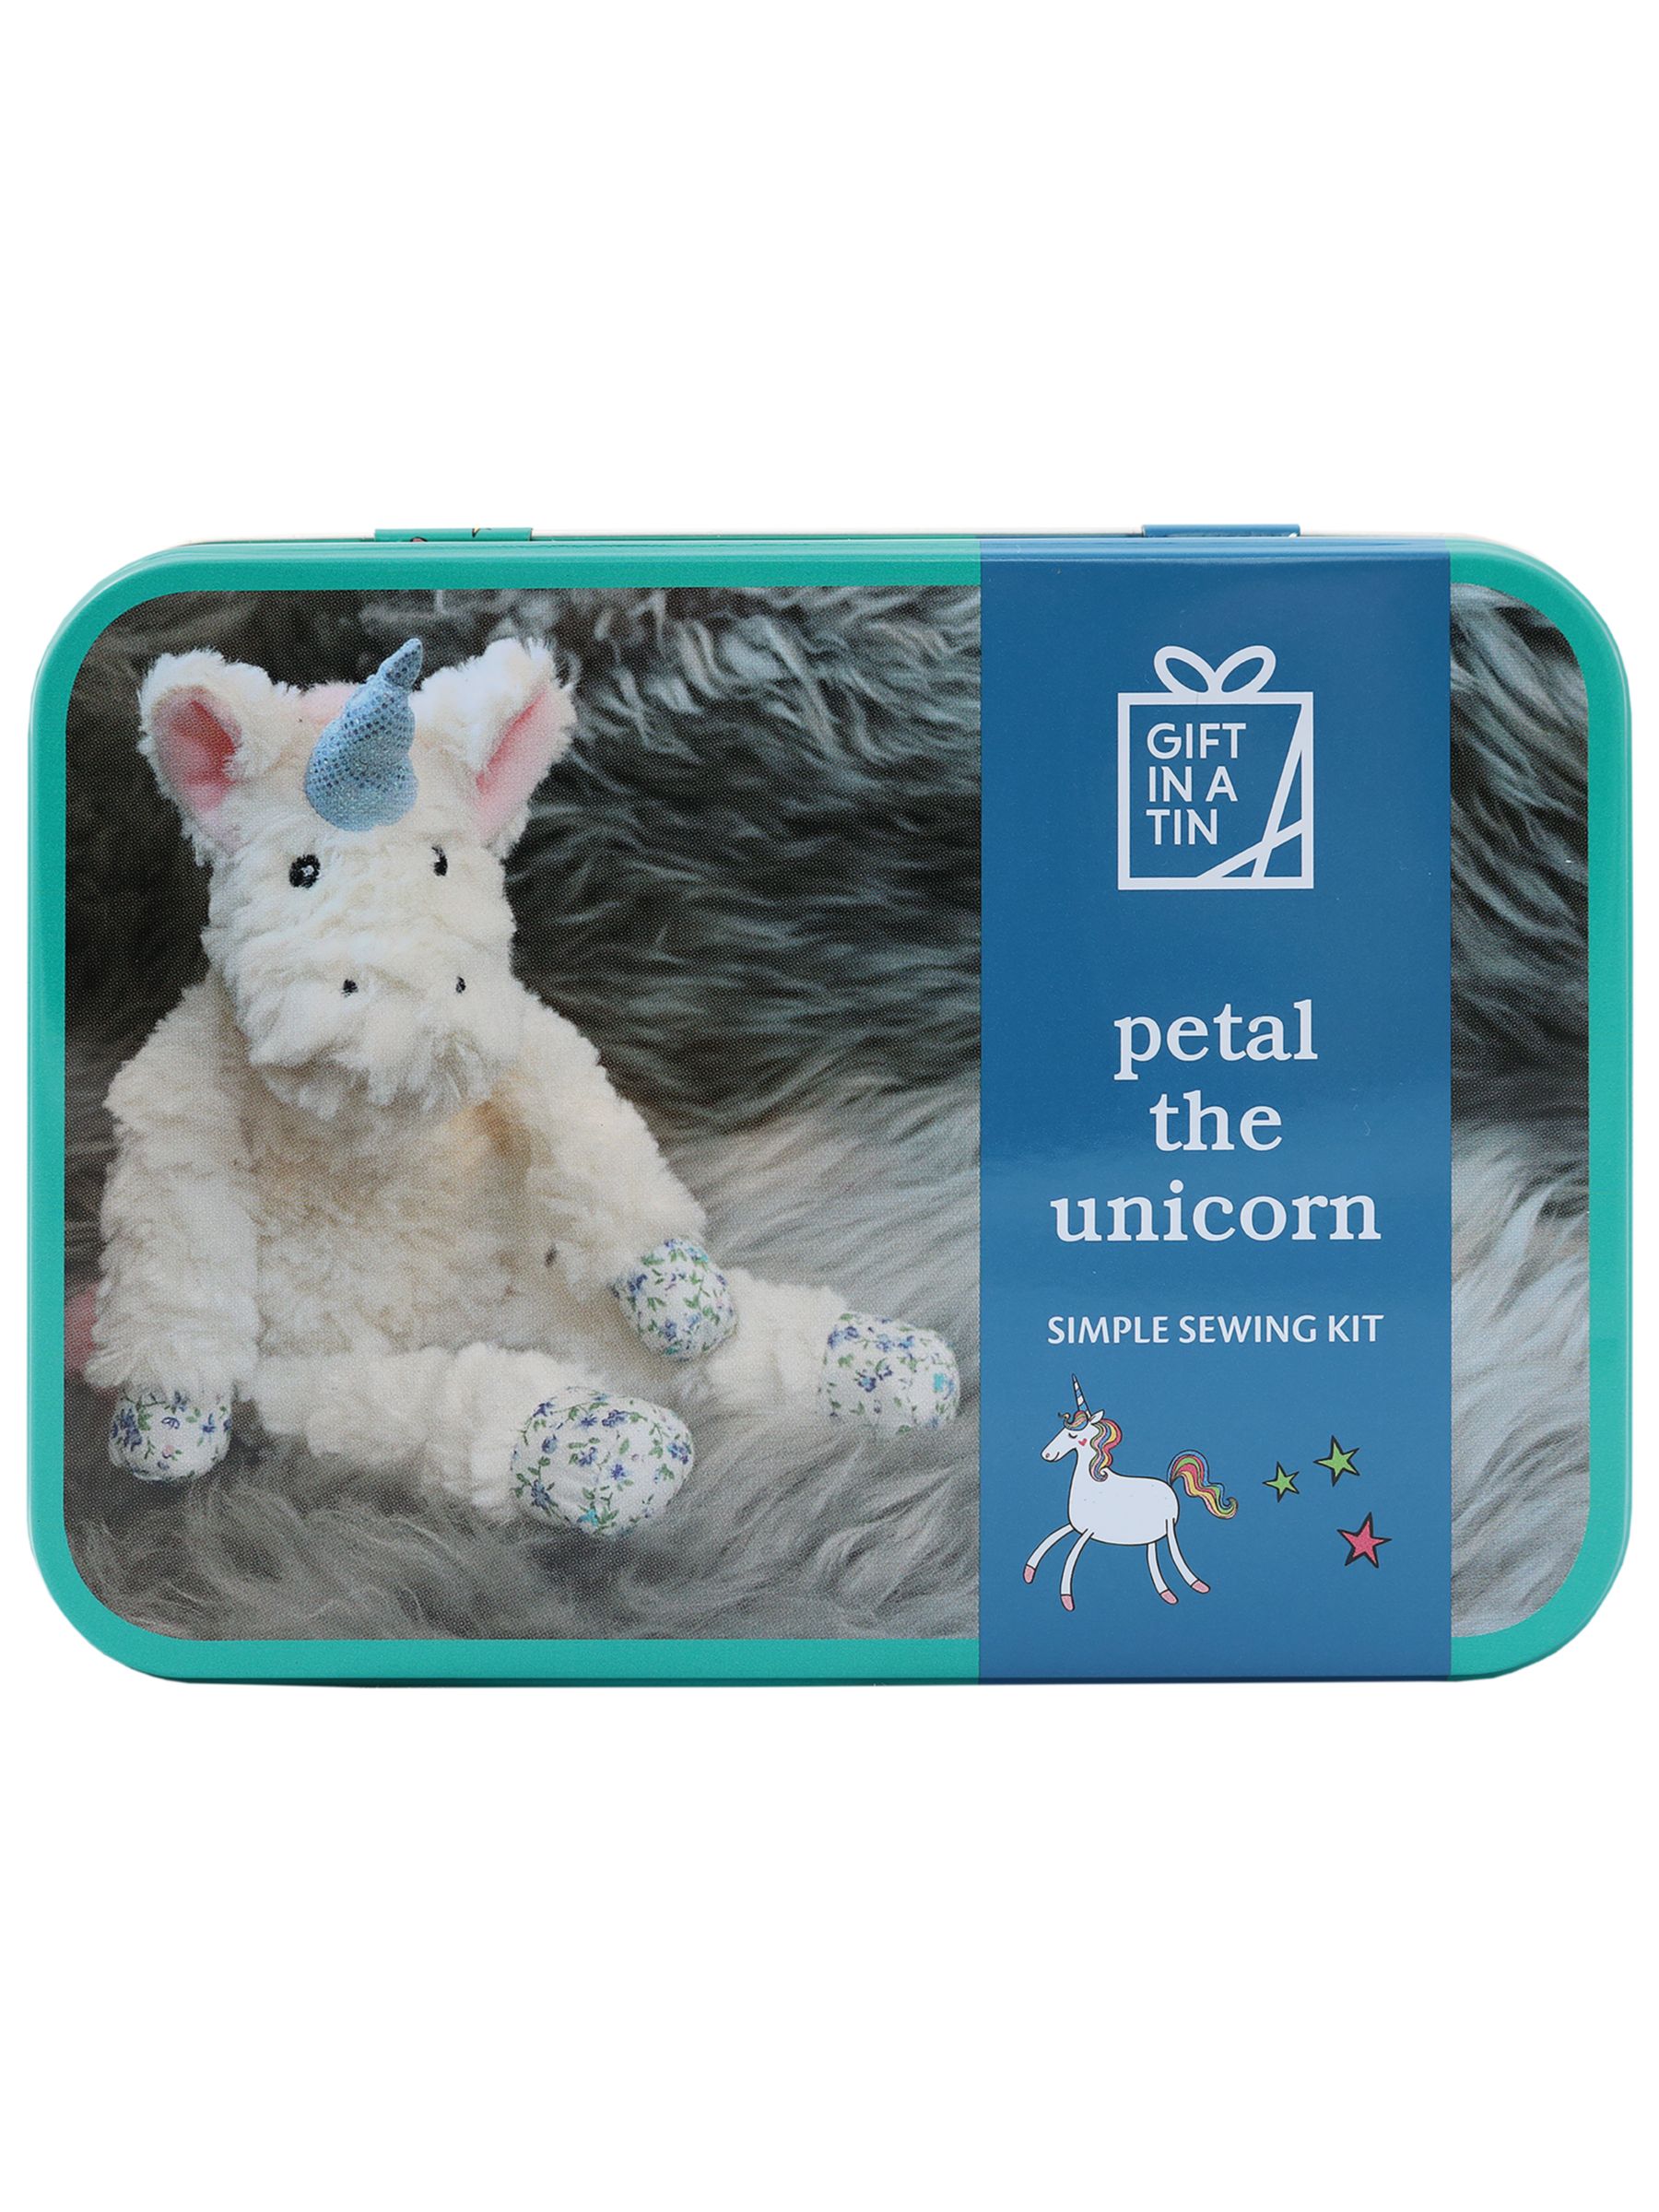 Apples to Pears Gift in a Tin Petal the Unicorn Simple Sewing Kit